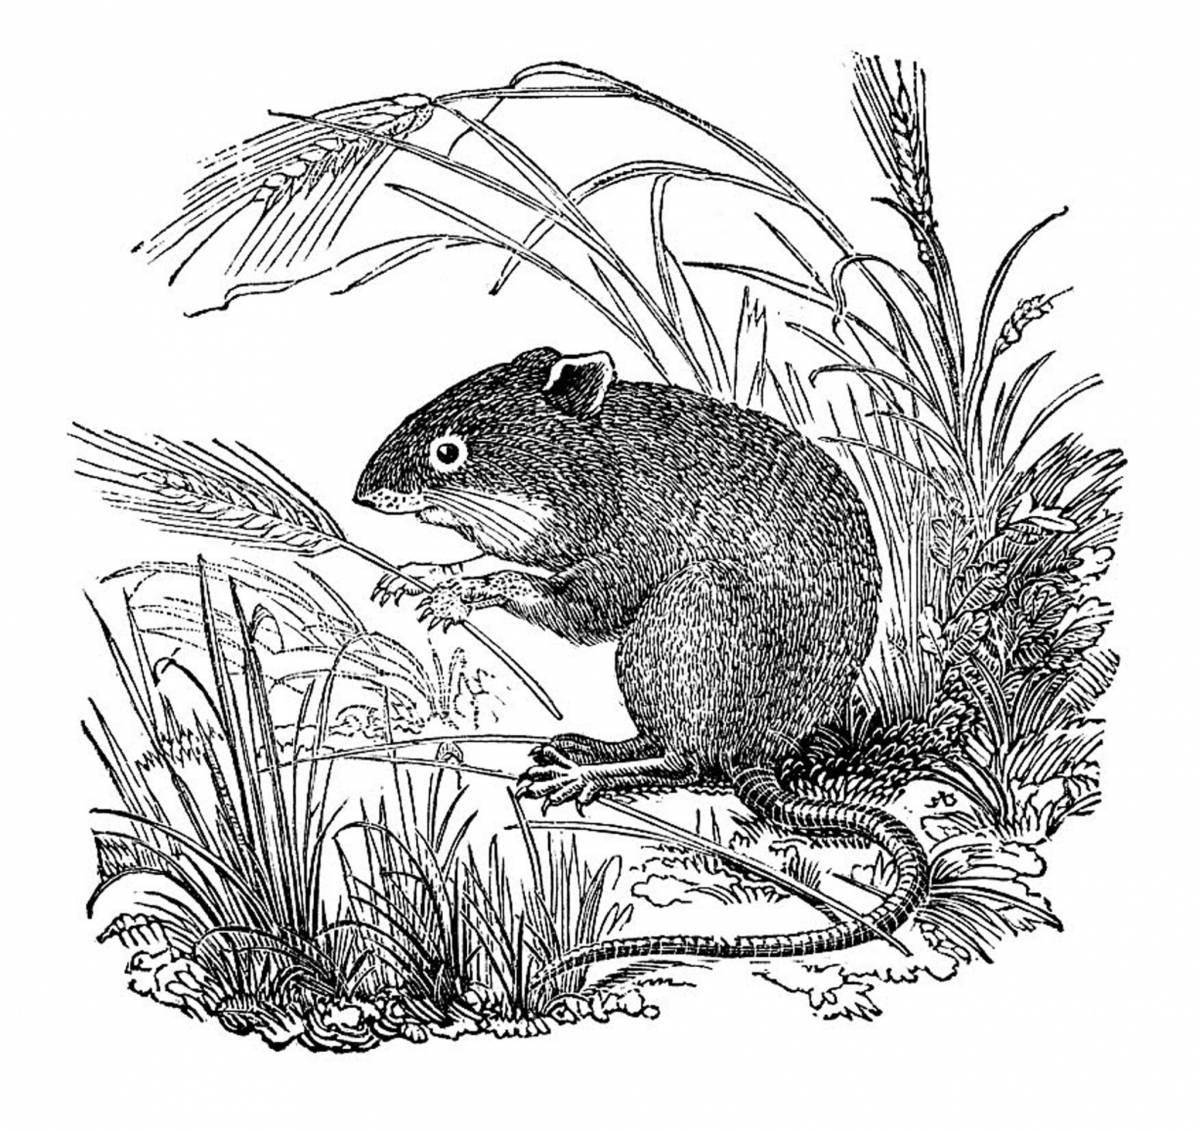 Coloring page dramatic harvest mouse